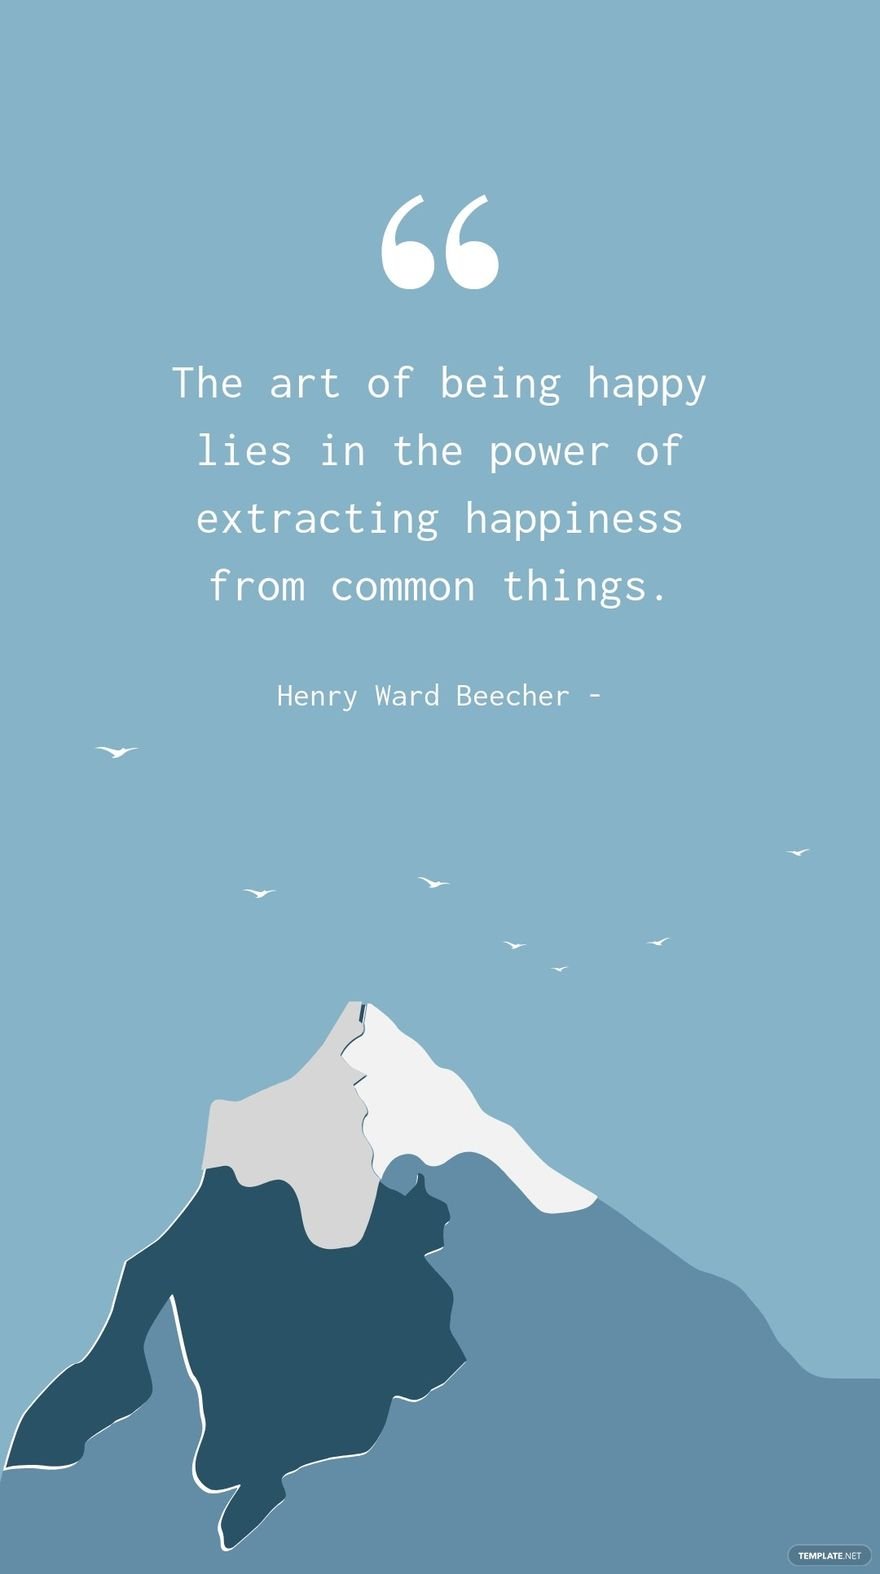 Henry Ward Beecher - The art of being happy lies in the power of extracting happiness from common things.